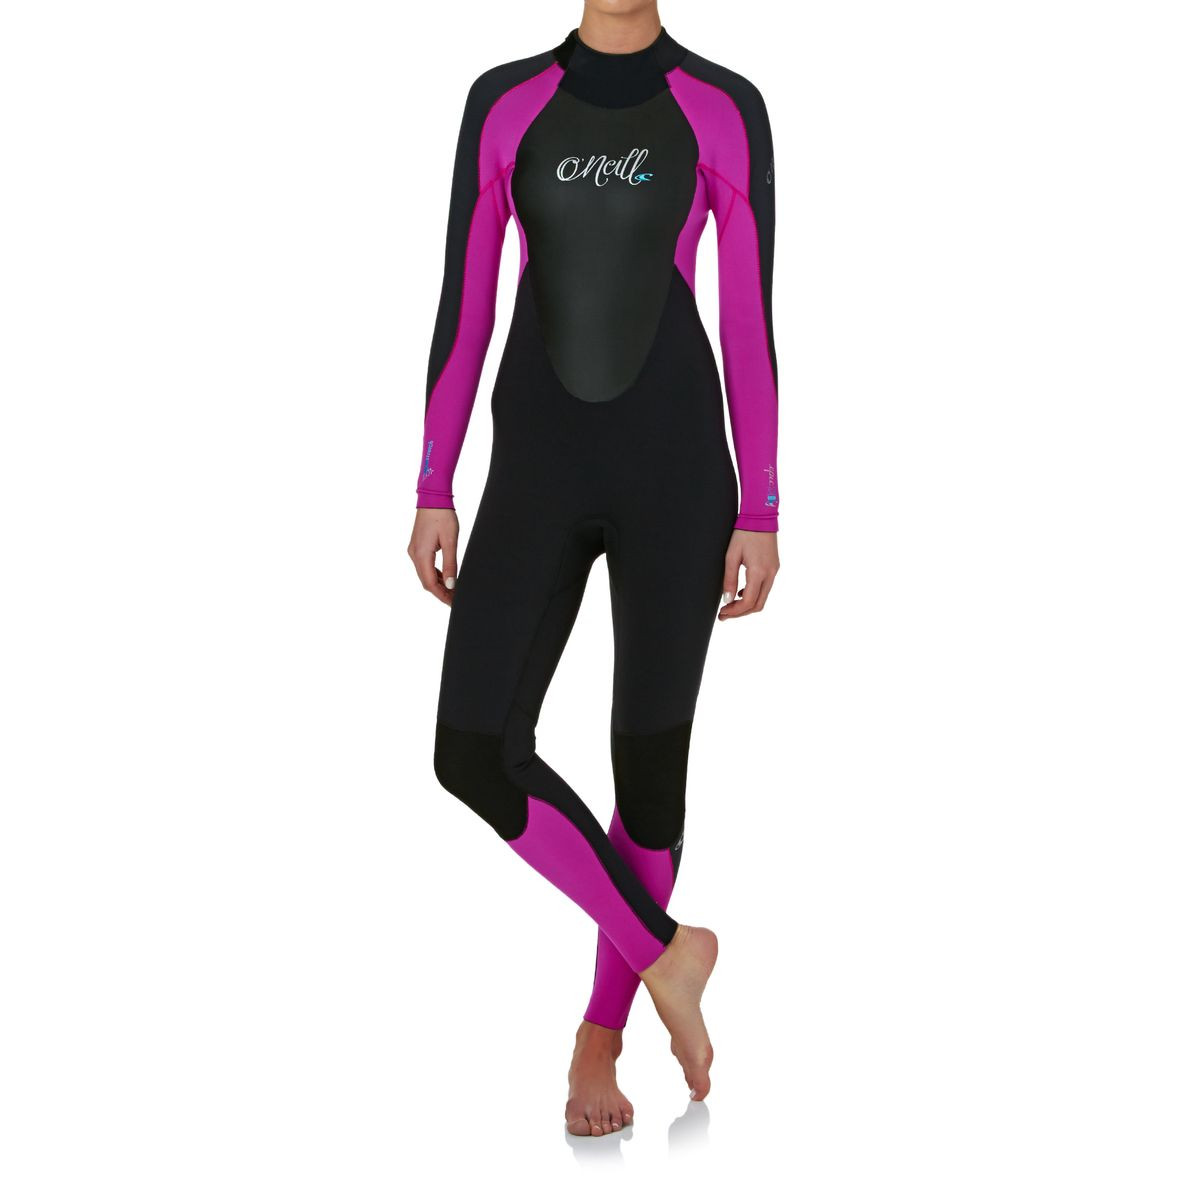 O'Neill Womens Epic 3/2mm Back Zip Wetsuit - Black/ Berry/ Graphite